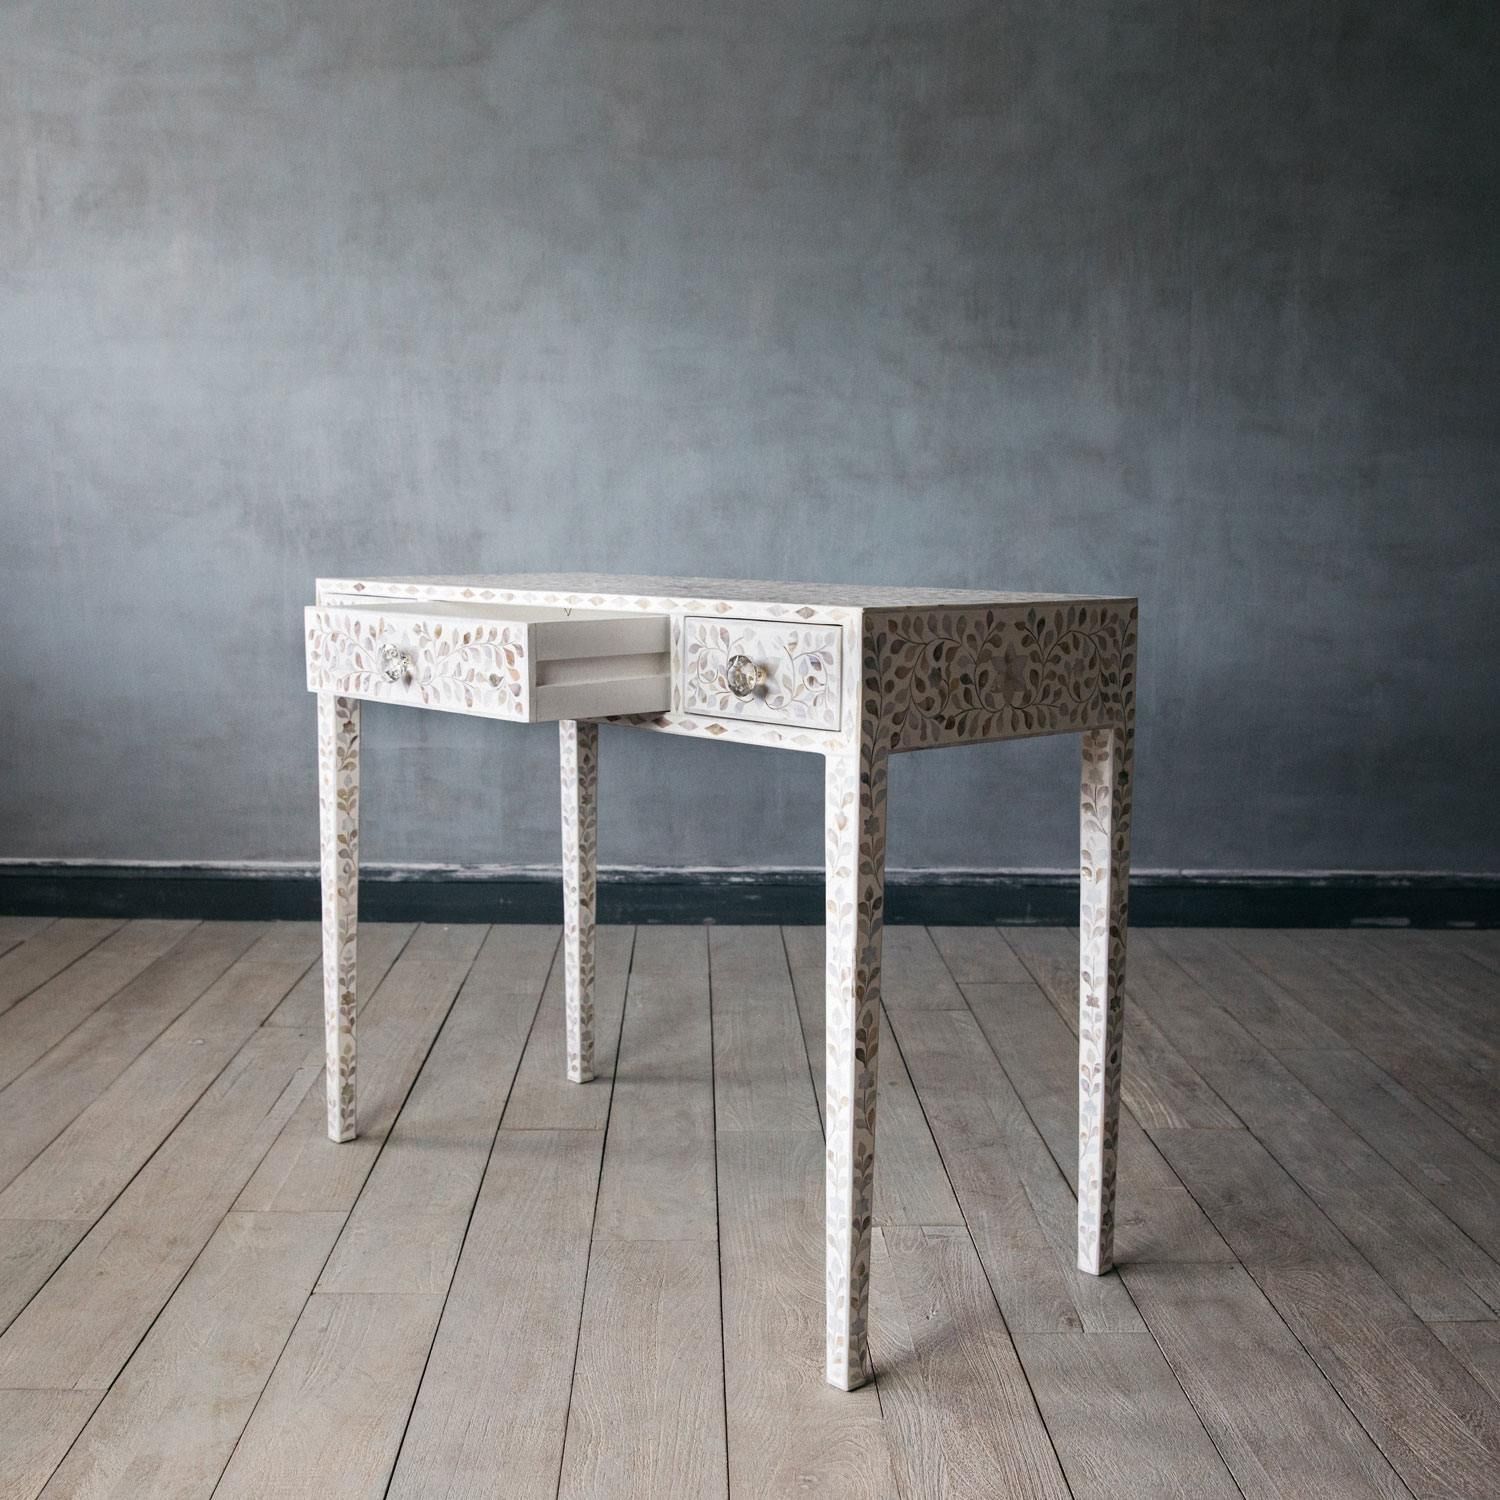 Iris Dresser Console & Stool - White Mother of Pearl